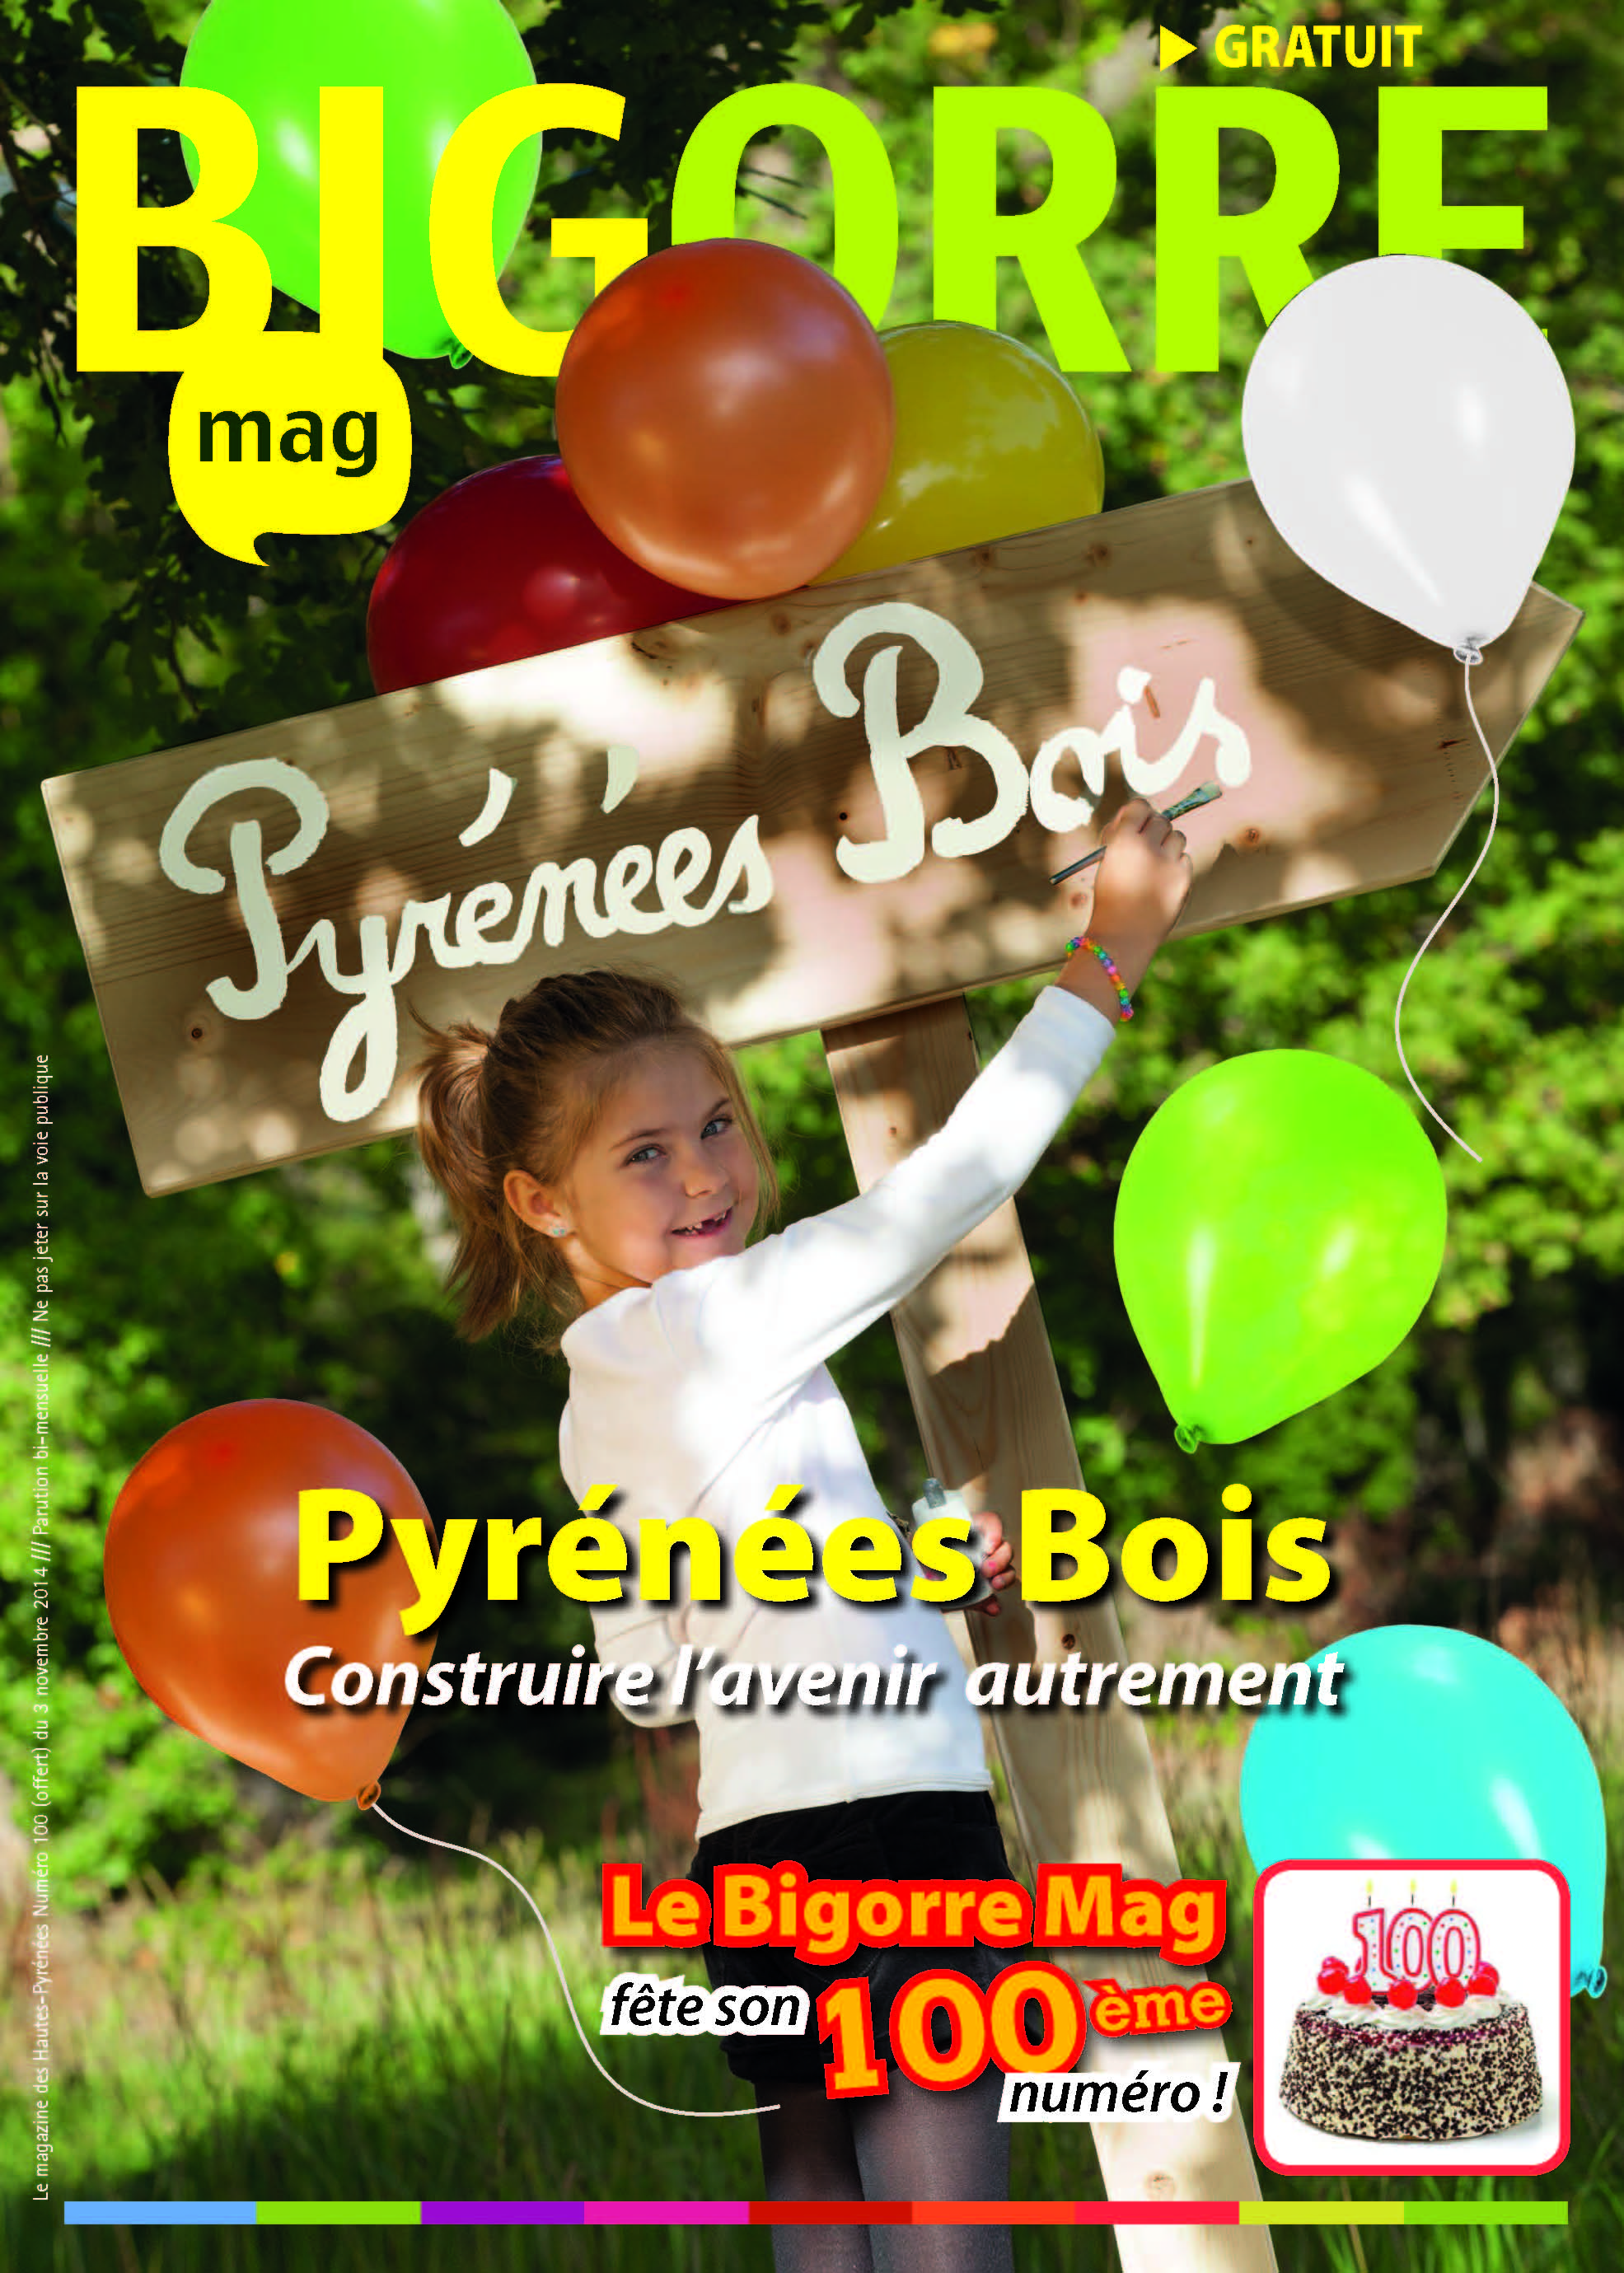 Bigorre Mag n° 100 couverture PYRENEES BOIS oct 2014